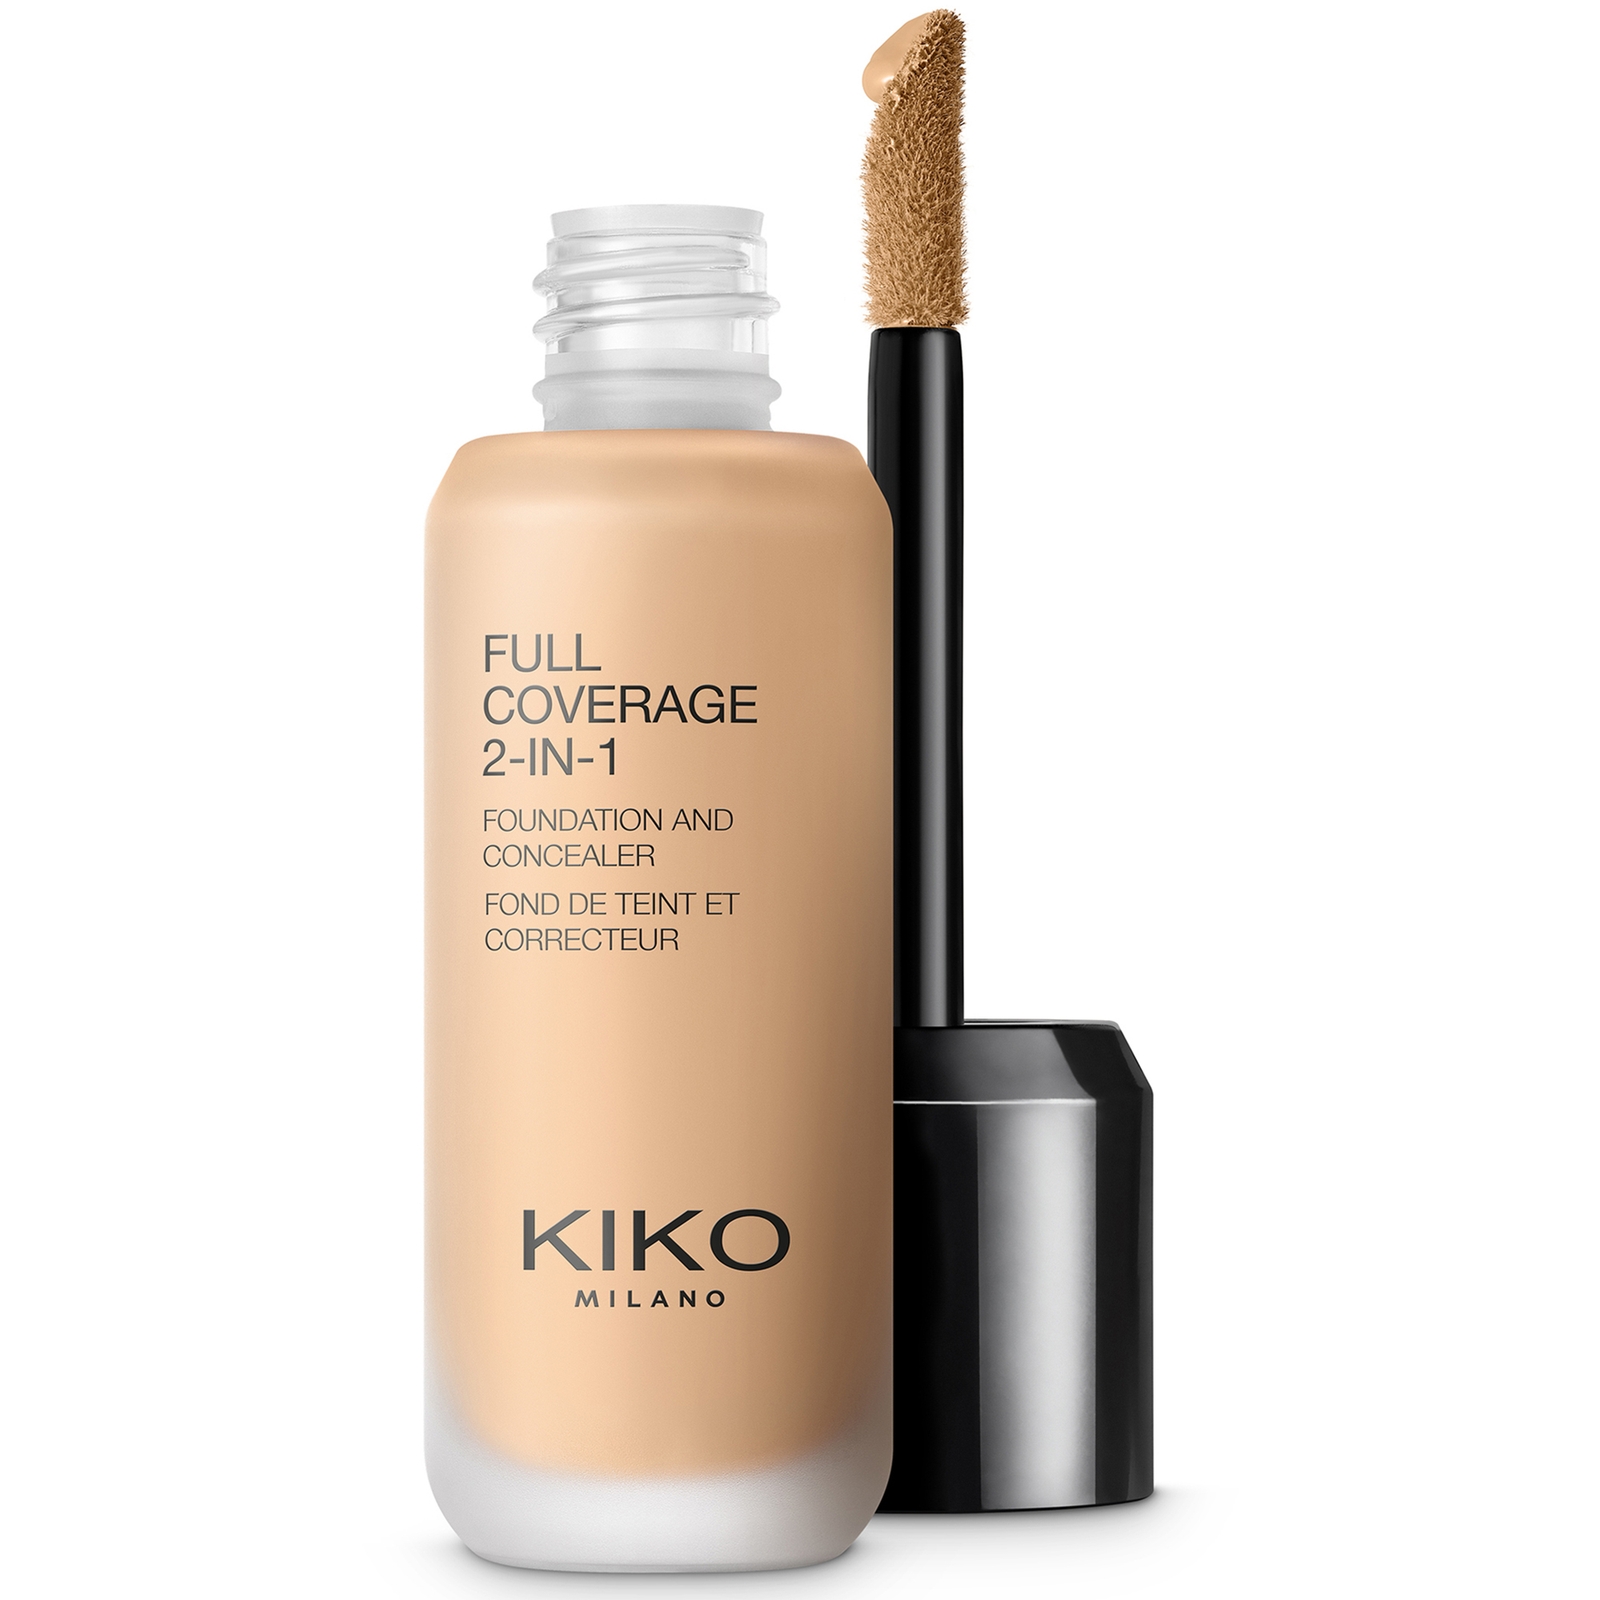 KIKO Milano Full Coverage 2-in-1 Foundation and Concealer 25ml (Various Shades) - 55 Warm Beige